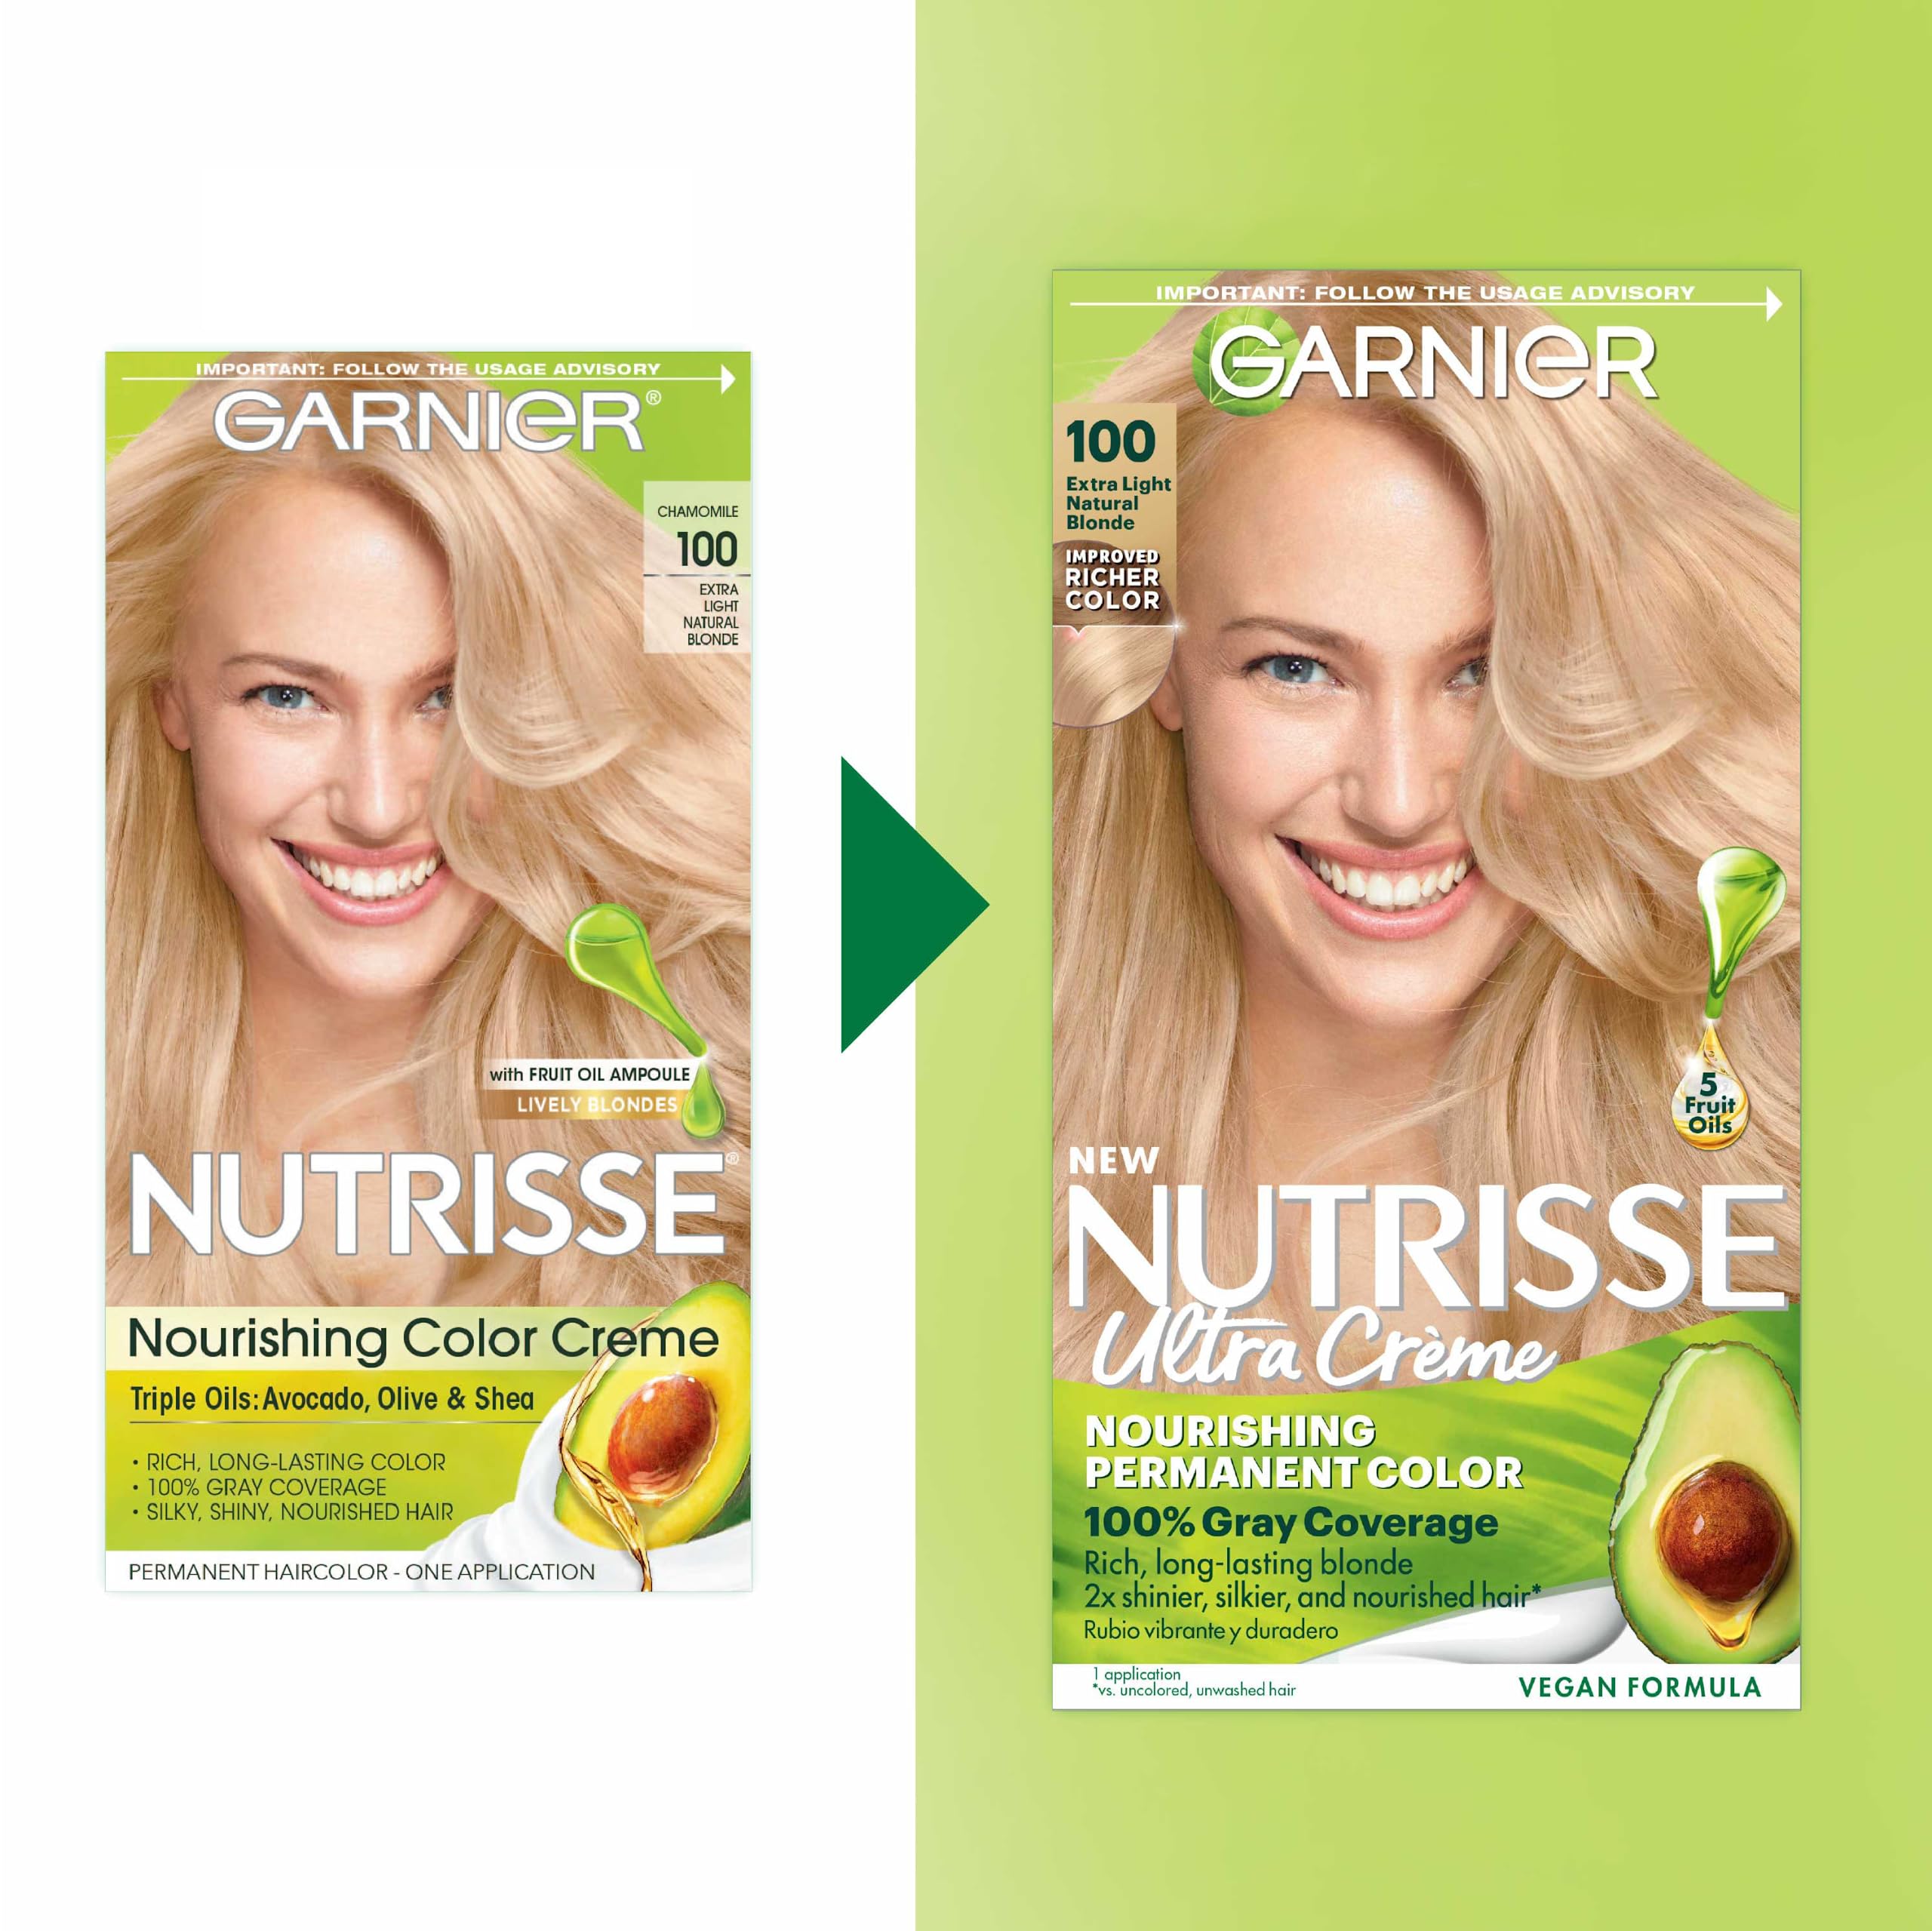 Garnier Hair Color Nutrisse Nourishing Creme, 100 Extra-Light Natural Blonde (Chamomile) Permanent Hair Dye, 2 Count (Packaging May Vary)